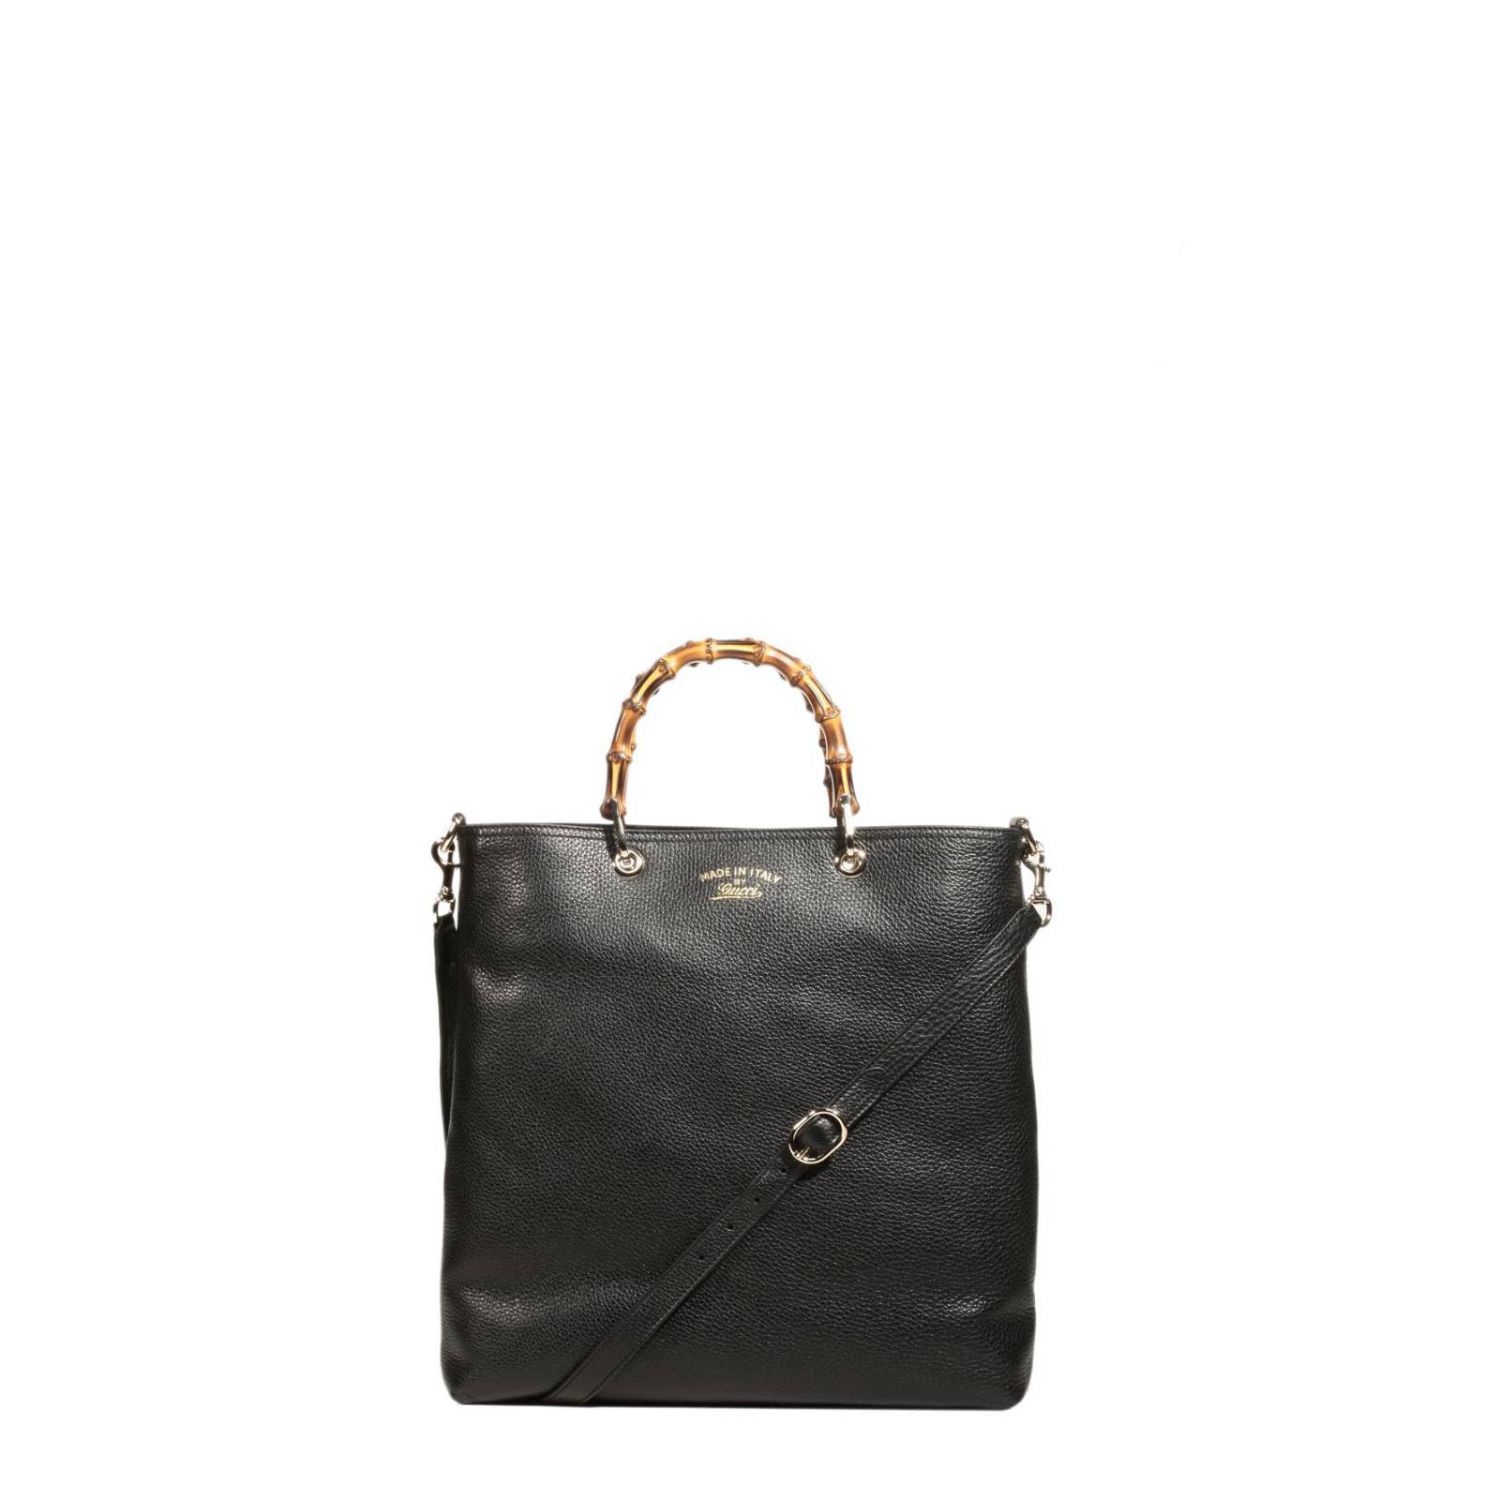 Gucci Handbag Bamboo Leather Tote 2 Handles Bamboo in Black | Lyst